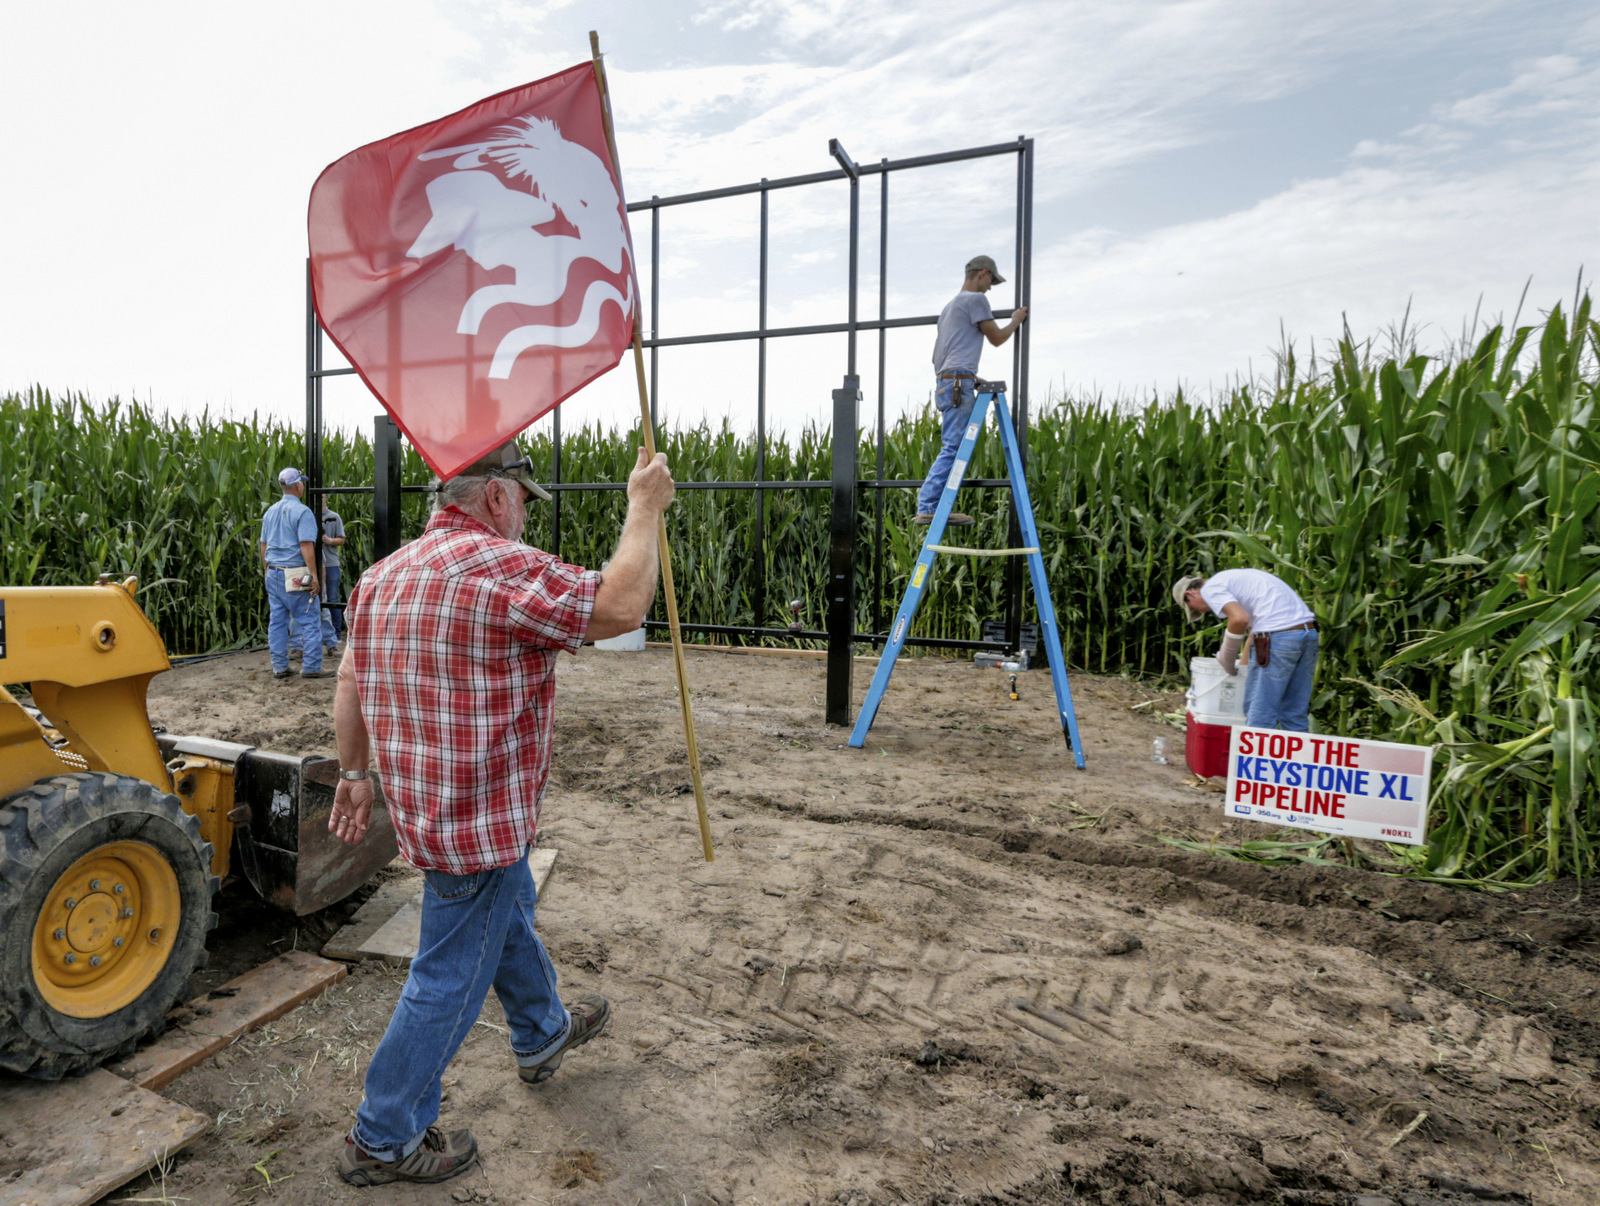 Tom Genung of the organization Bold Nebraska is about to pitch a flag of the Cowboy Indian Alliance at the proposed path of the Keystone XL pipeline, in Silver Creek, Neb., where landowner Jim Carlson and activists were building solar panels, July 29, 2017 (AP/Nati Harnik)